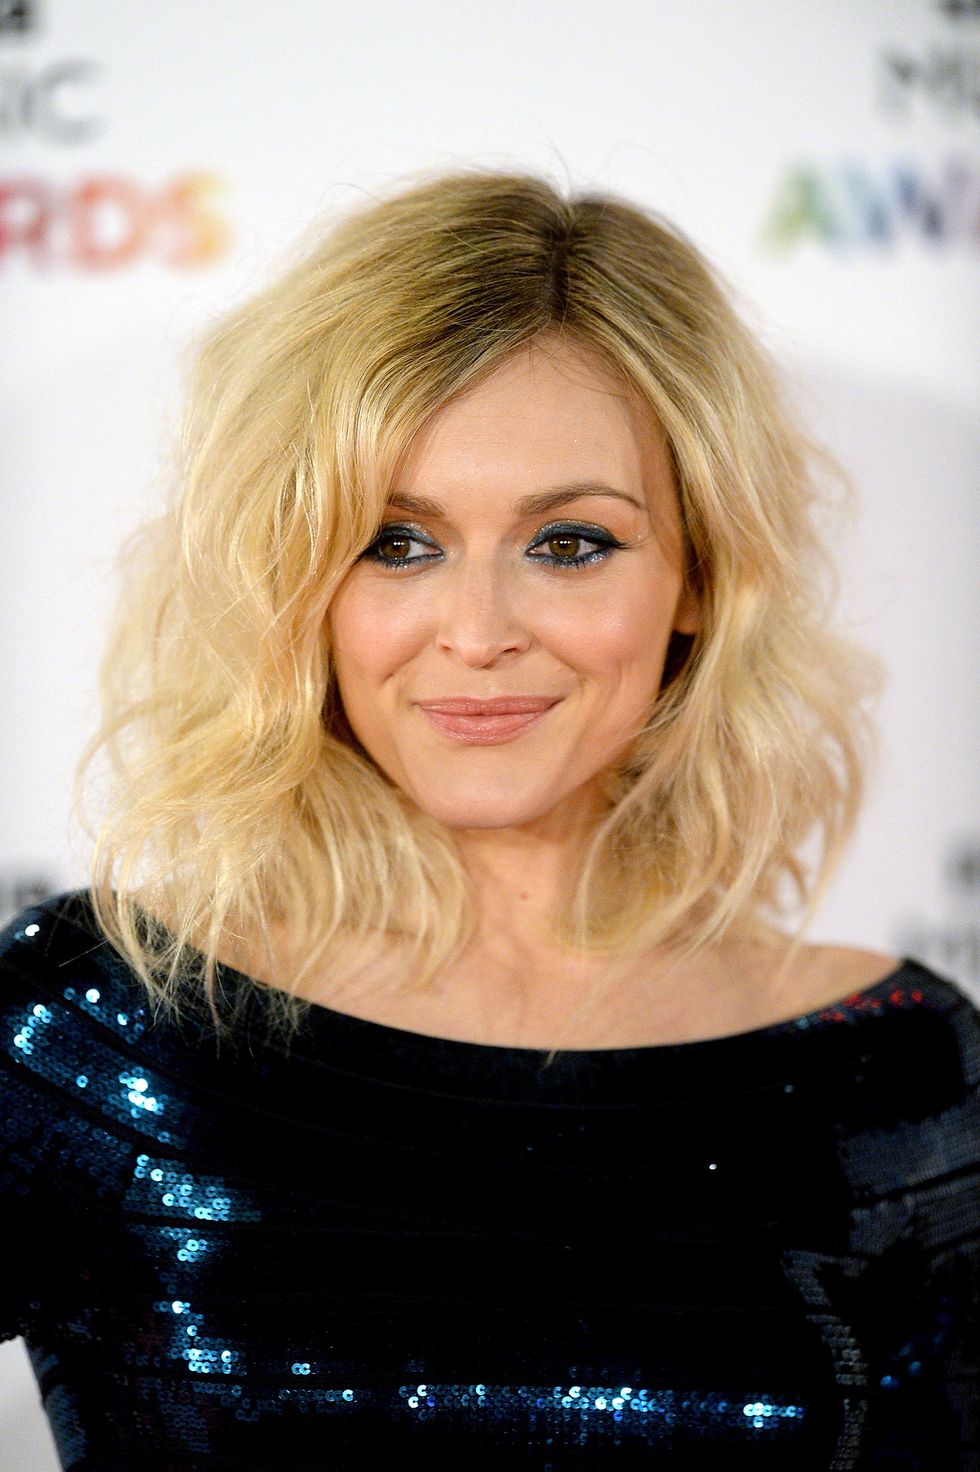 Hot hairstyles at the BBC Music Awards - Fearne Cotton